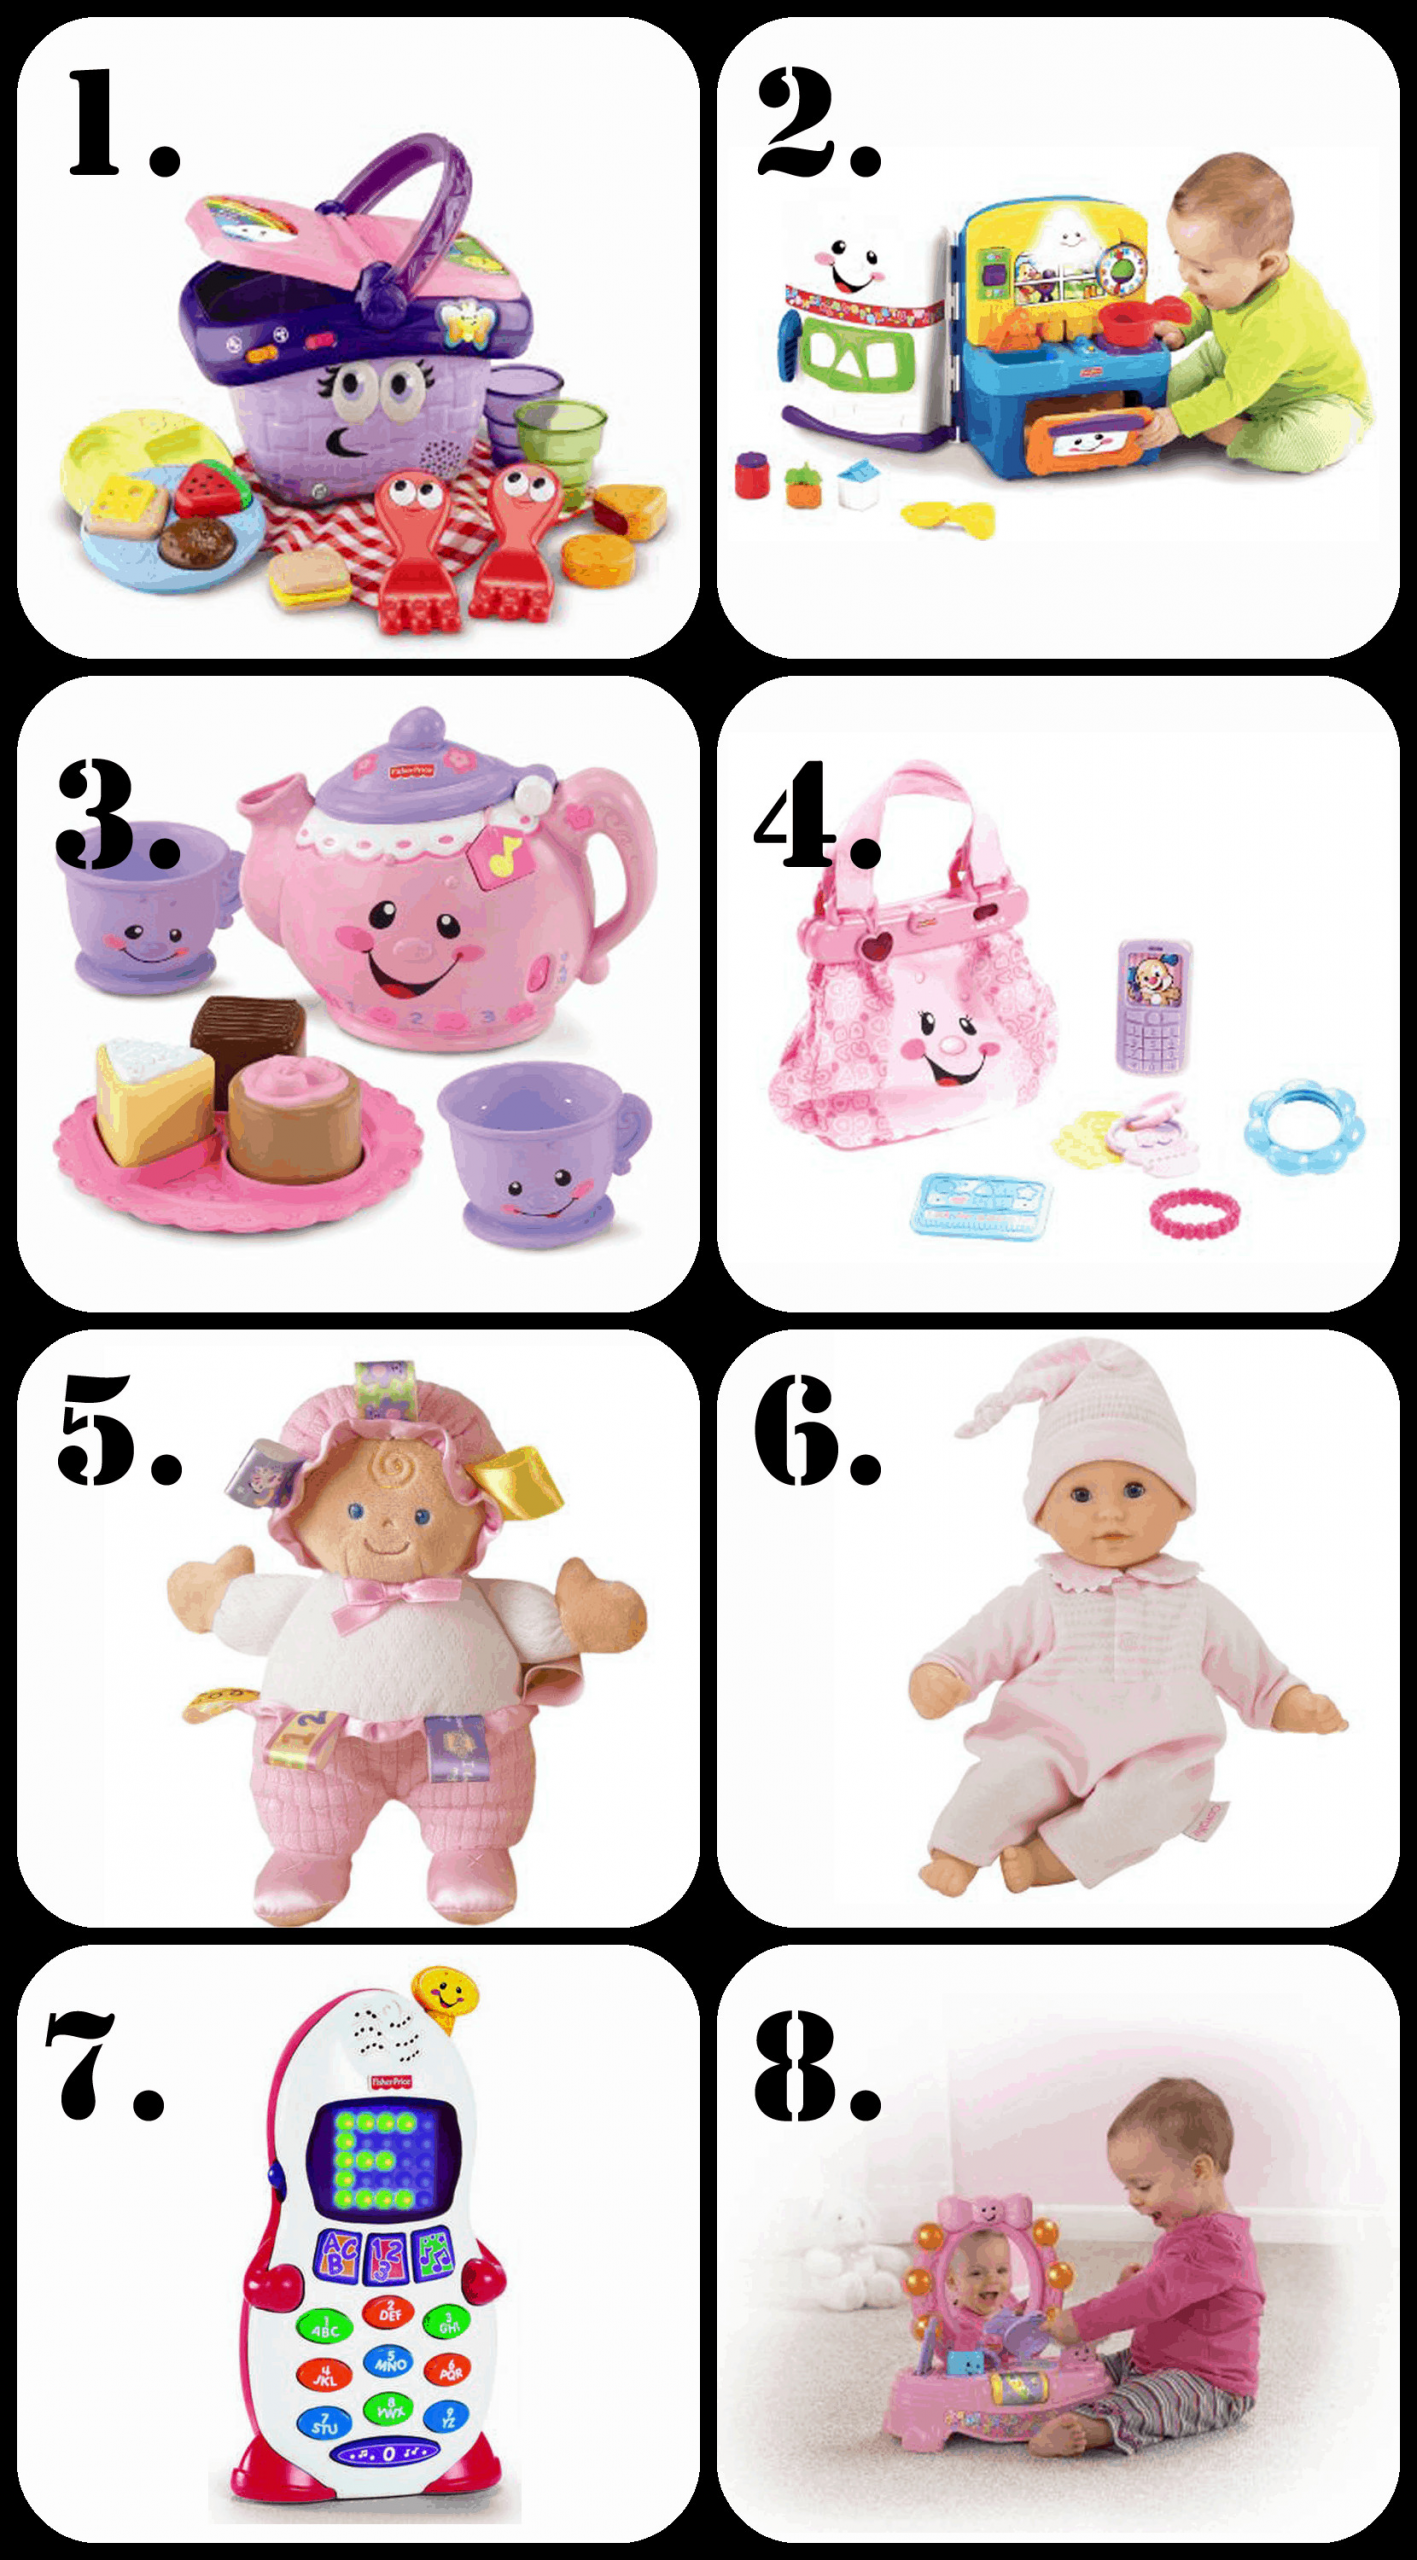 Gift Ideas For Girls First Birthday
 The Ultimate List of Gift Ideas for a 1 Year Old Girl